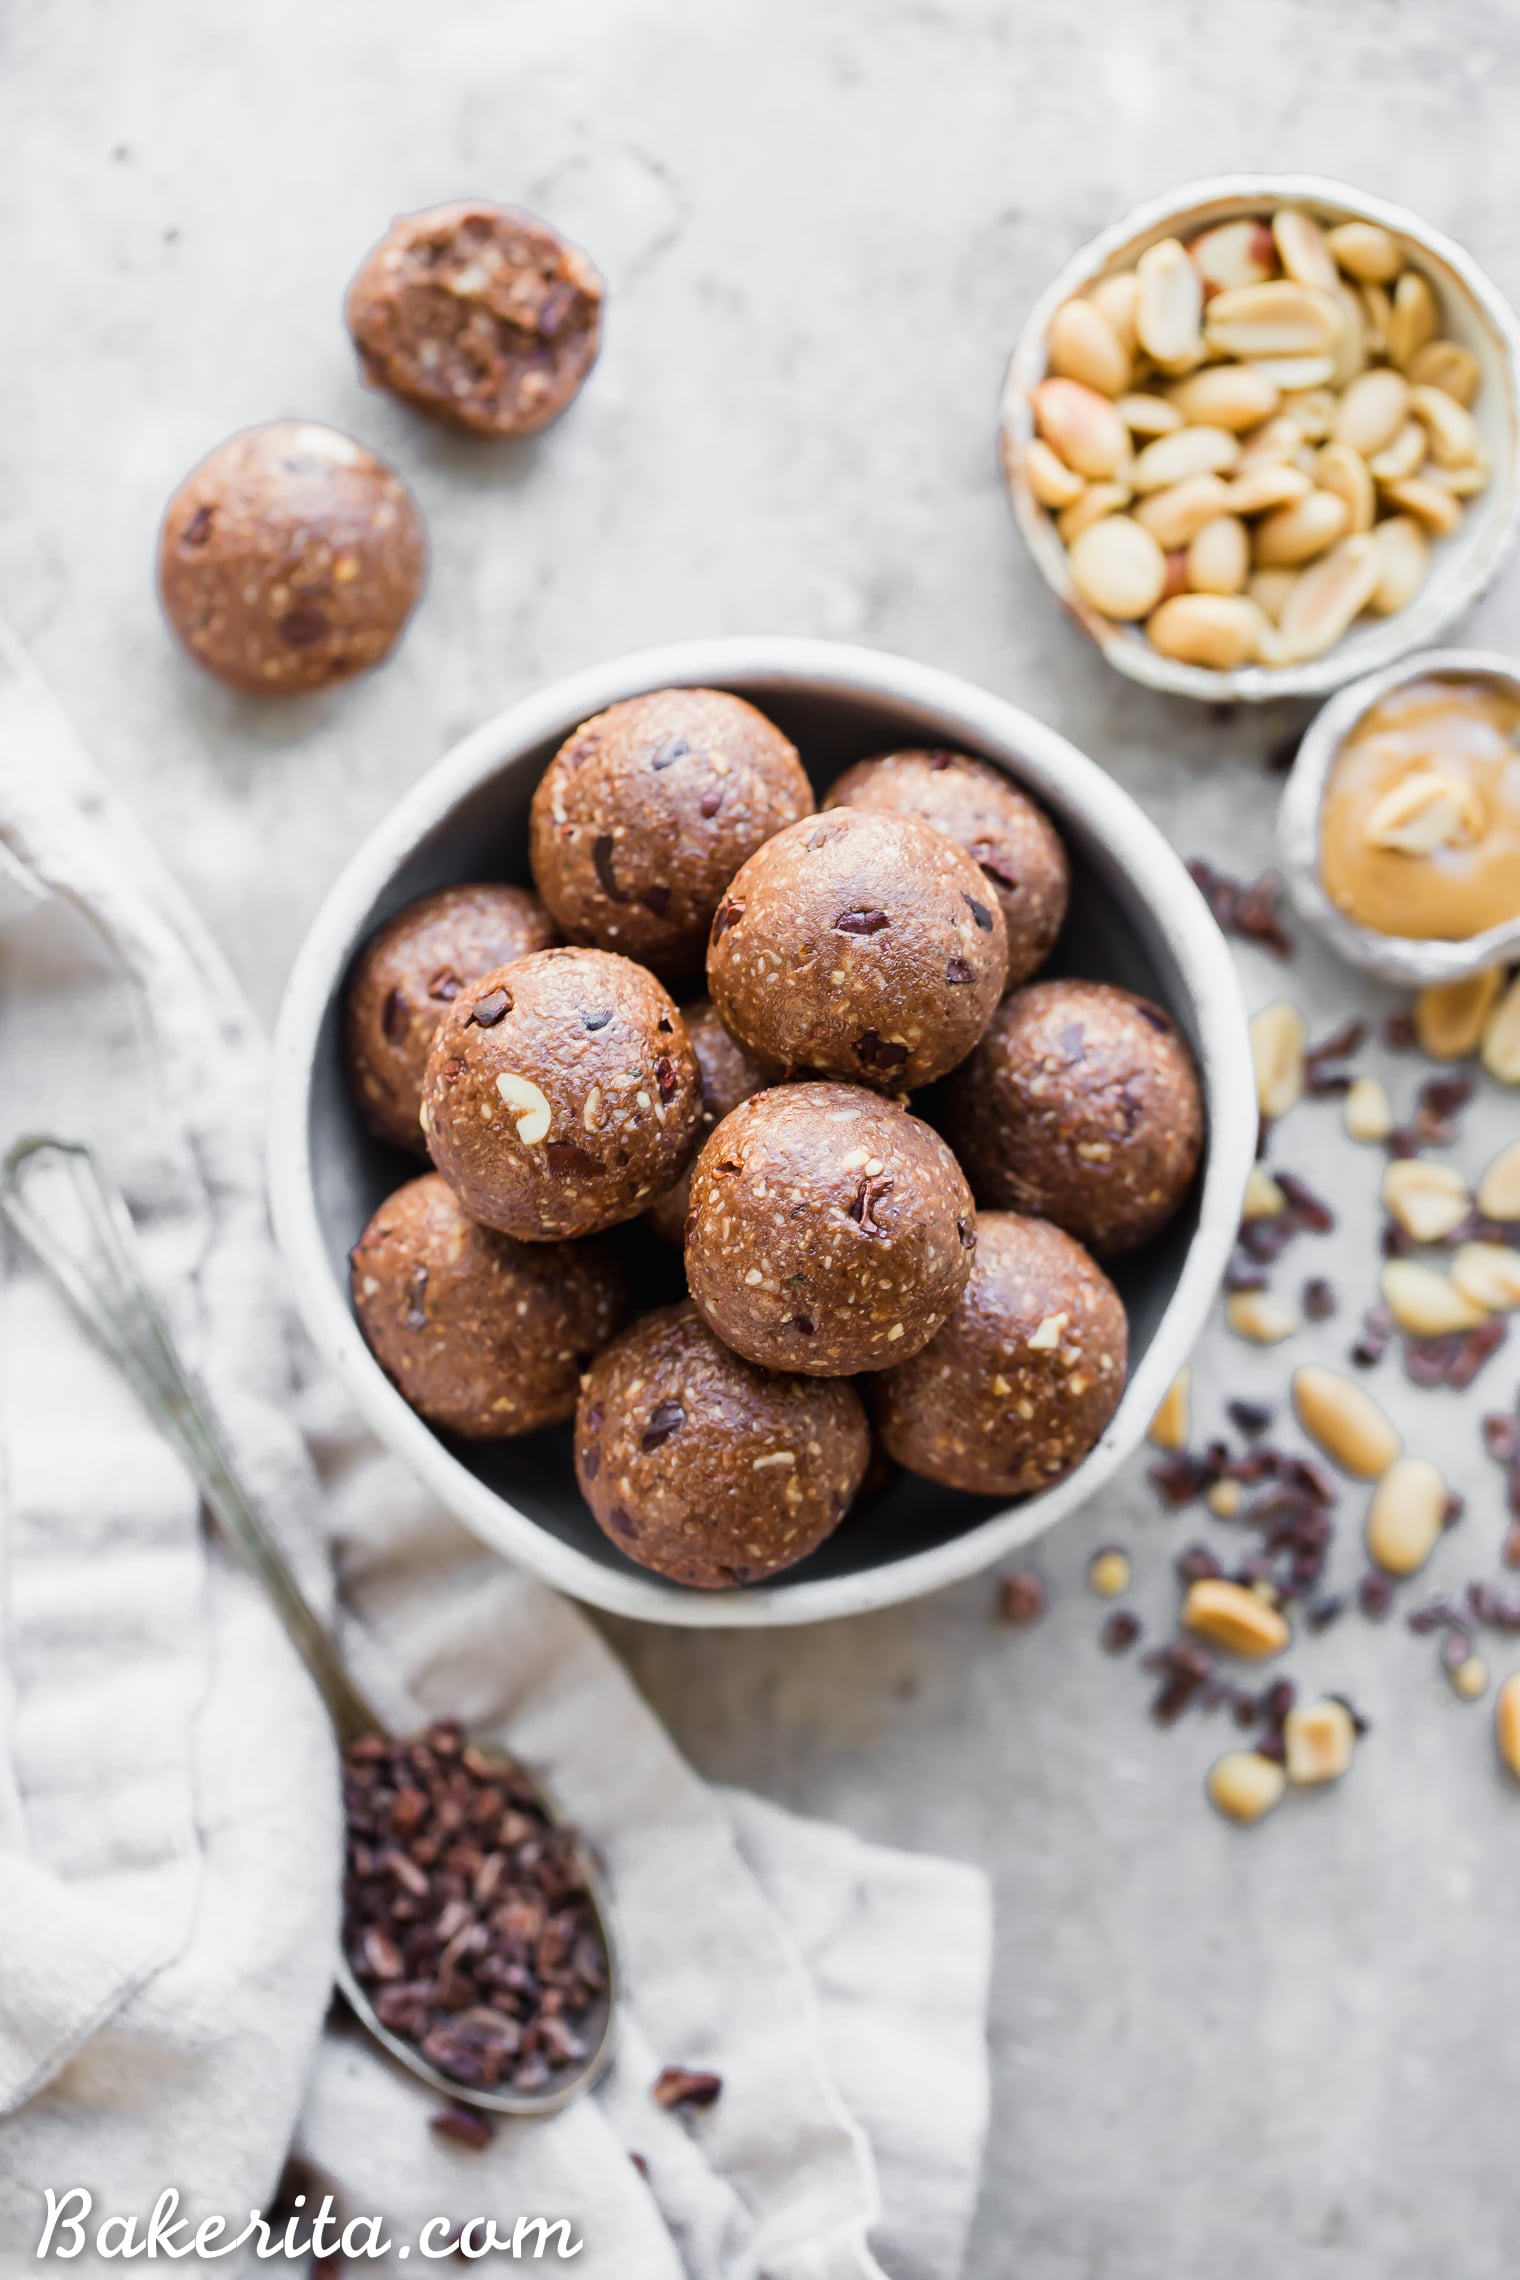 These Cacao Peanut Butter Fat Bombs taste like an indulgent treat, but they're actually super filling and fueling! Made with peanuts, peanut butter, and cacao nibs, these fat bombs are a gluten-free, keto, vegan, and low-sugar treat that makes the perfect snack. 